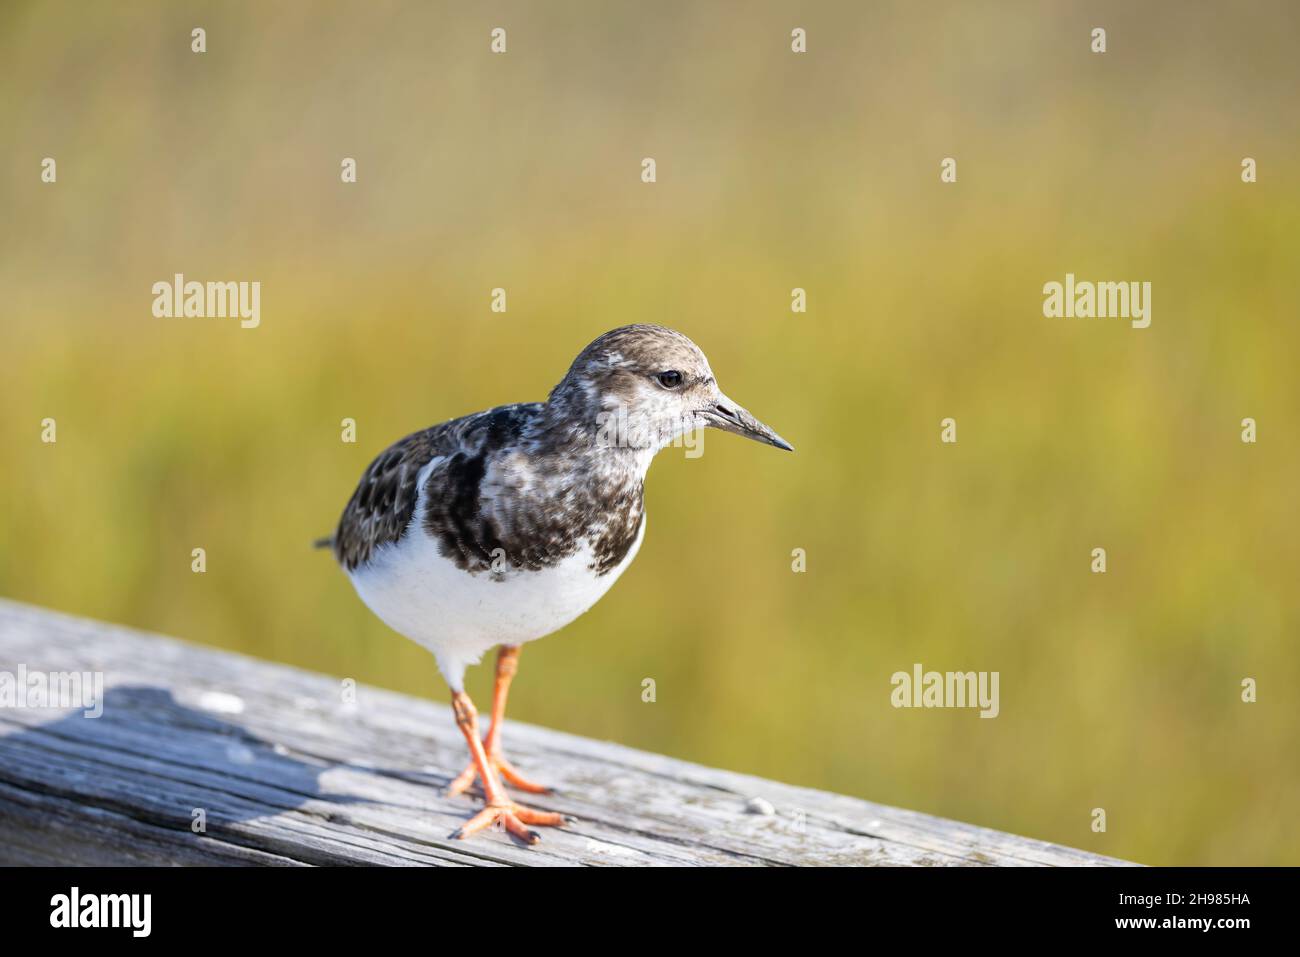 A close-up of a ruddy turnstone (Arenaria interpres) standing on the rail of a pier with a clean background. Stock Photo